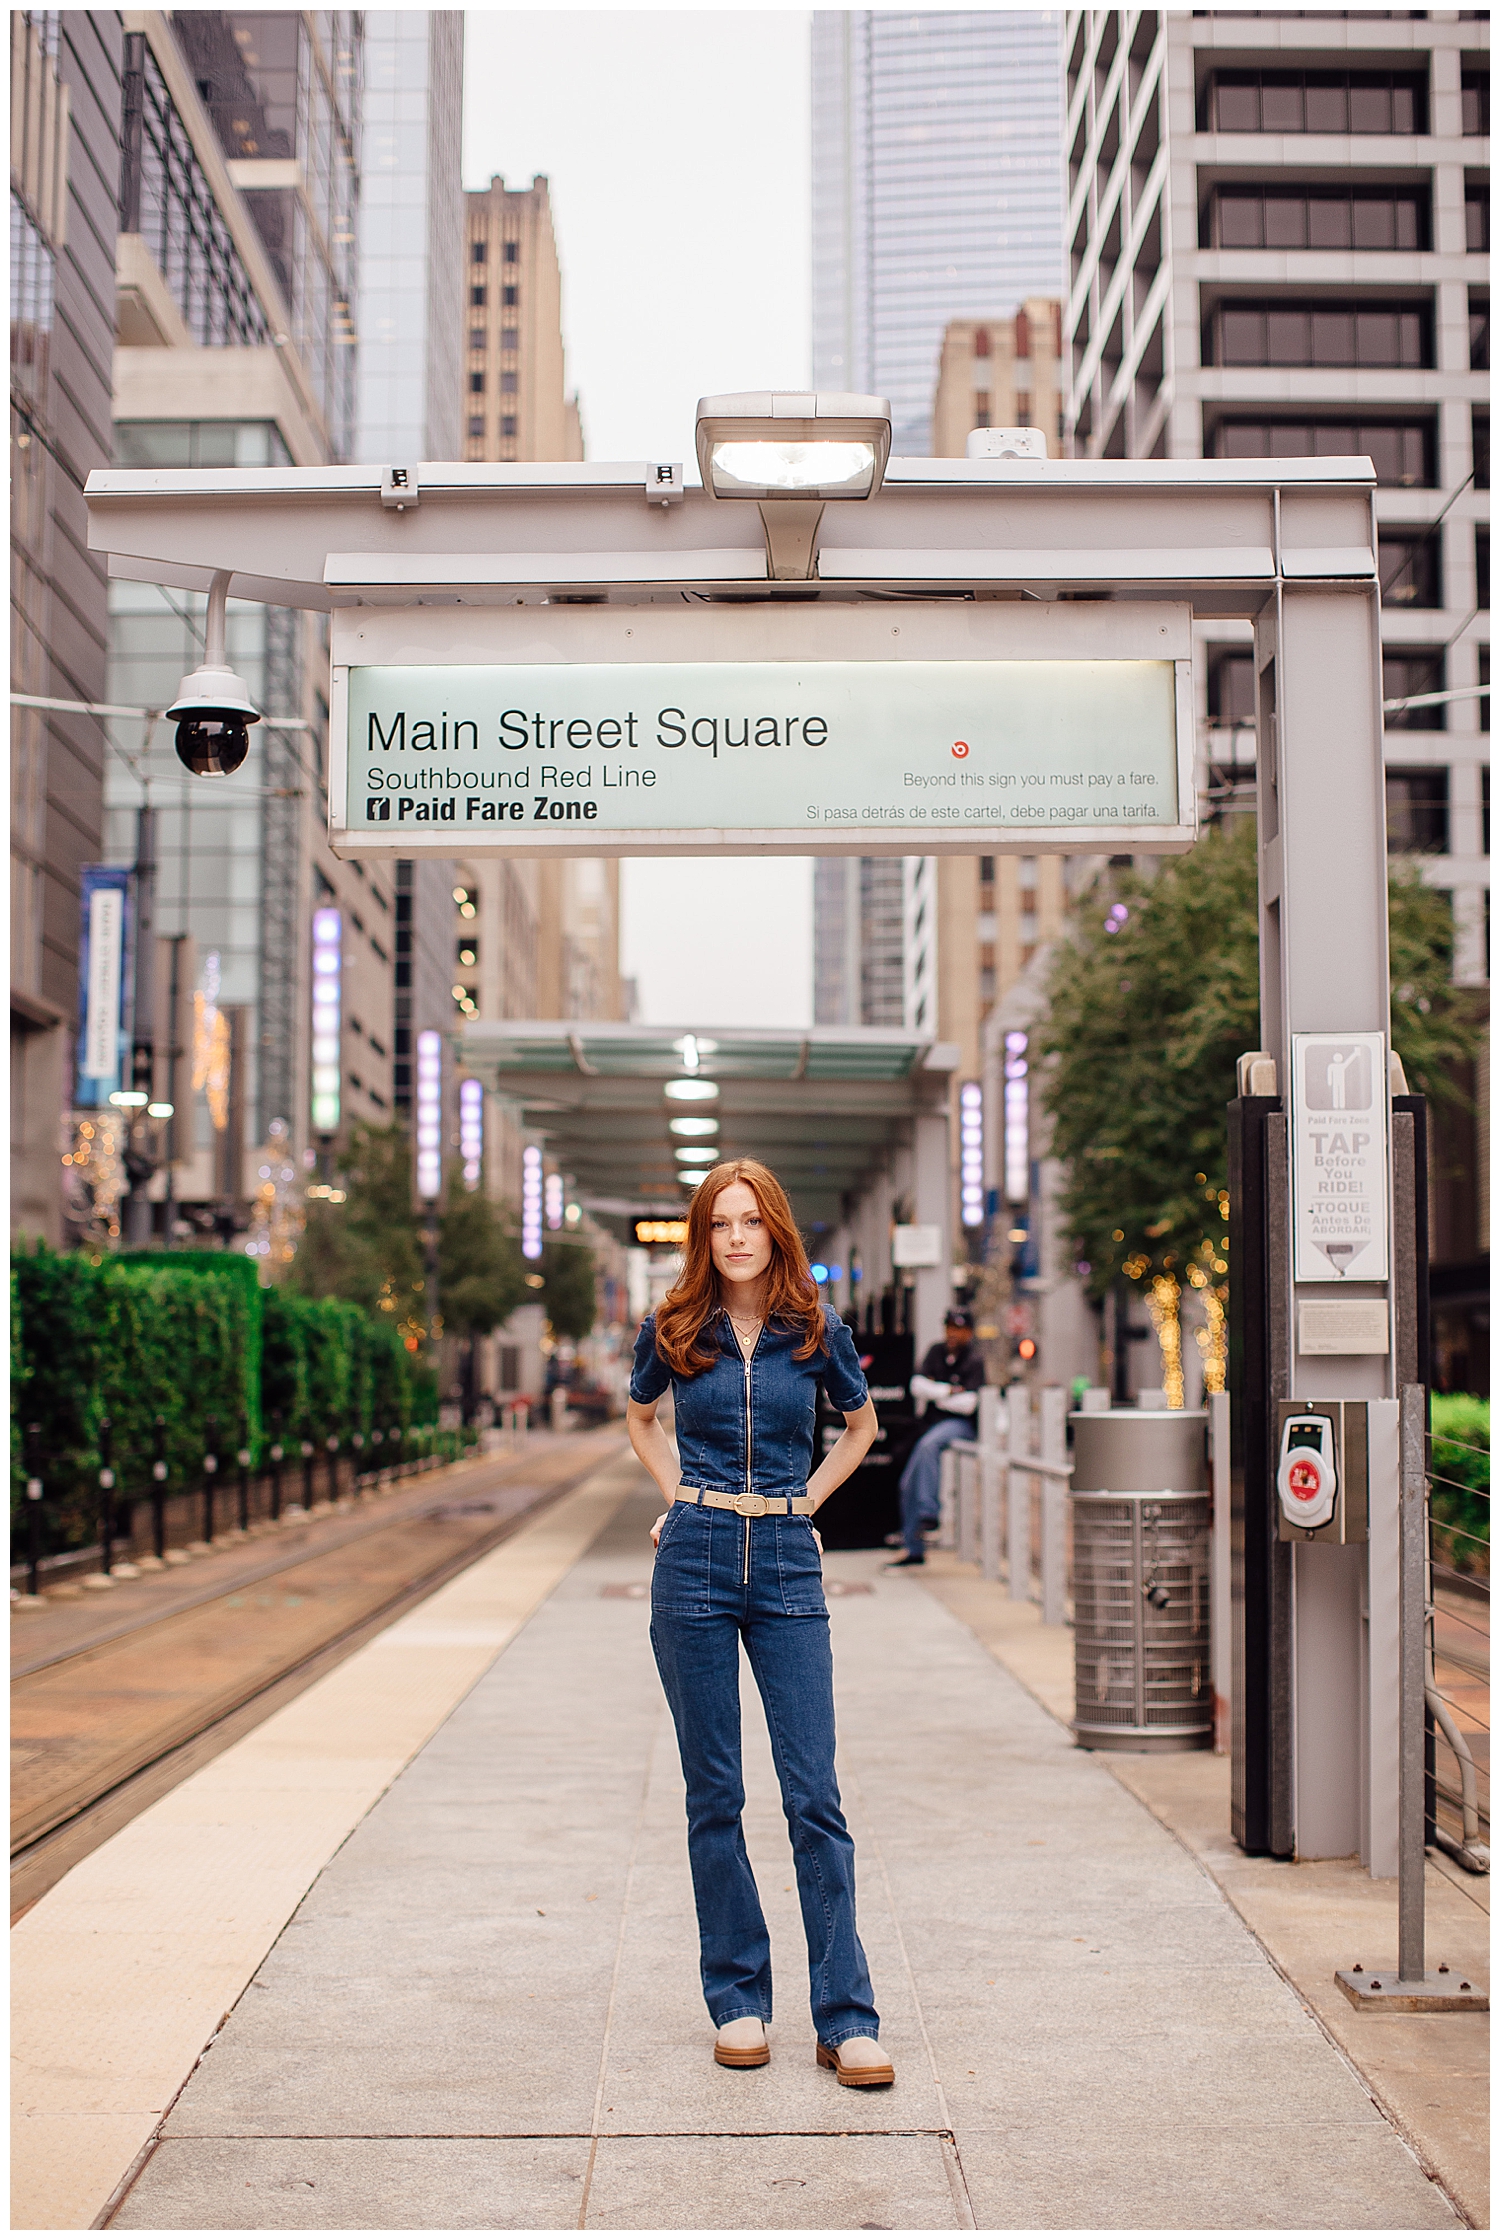 Downtown Houston Main Street Metro Rail with girl standing under sign in denim jumpsuit